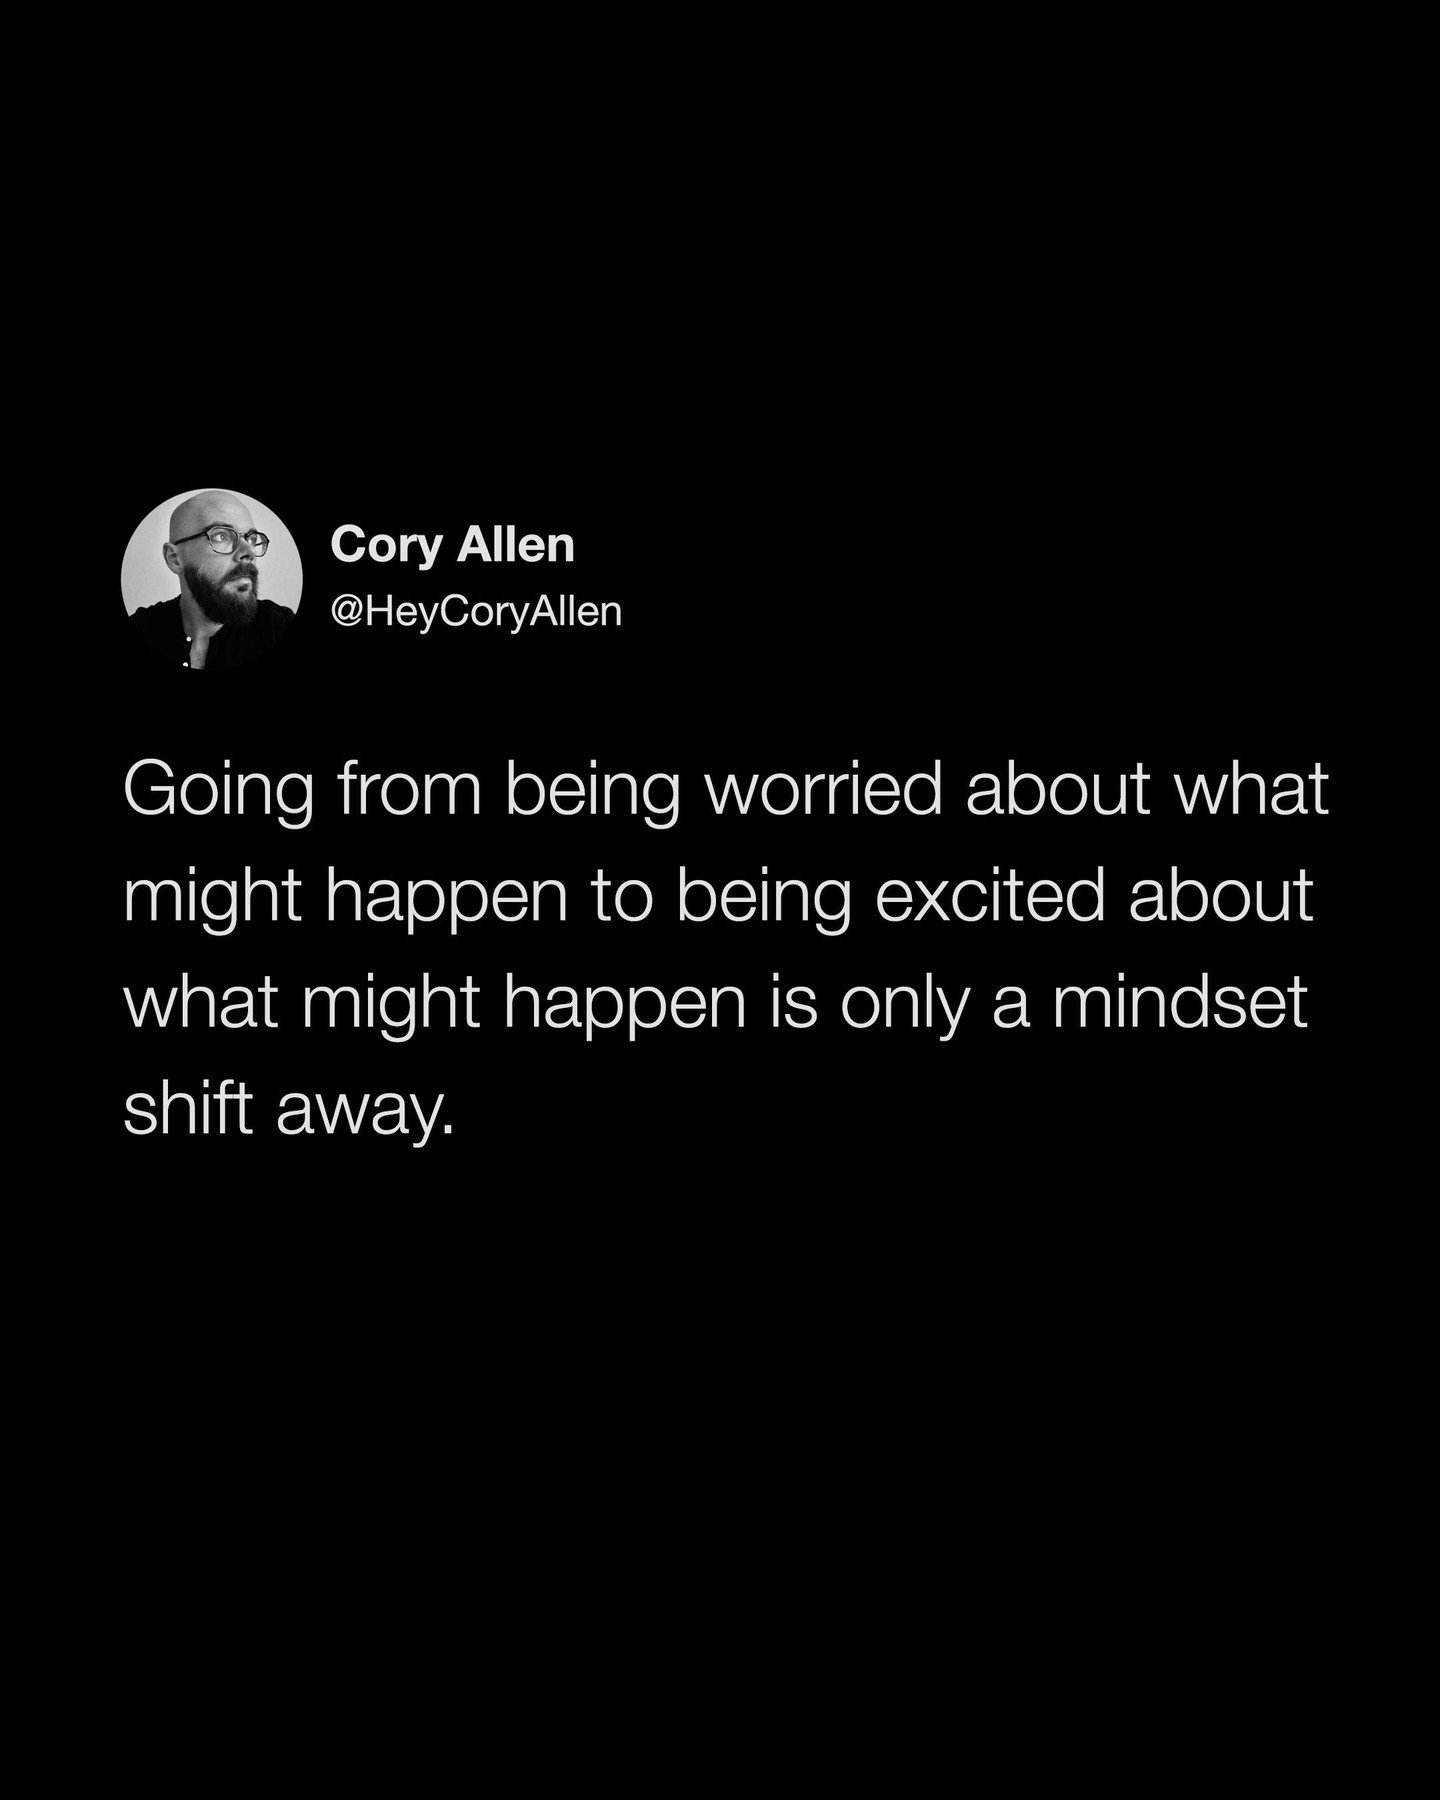 Mindsets are magic. We just have to remember to control them instead of letting them control us. 🖤

✍🏻 @heycoryallen: Going from being worried about what might happen to being excited about what might happen is only a mindset shift away.